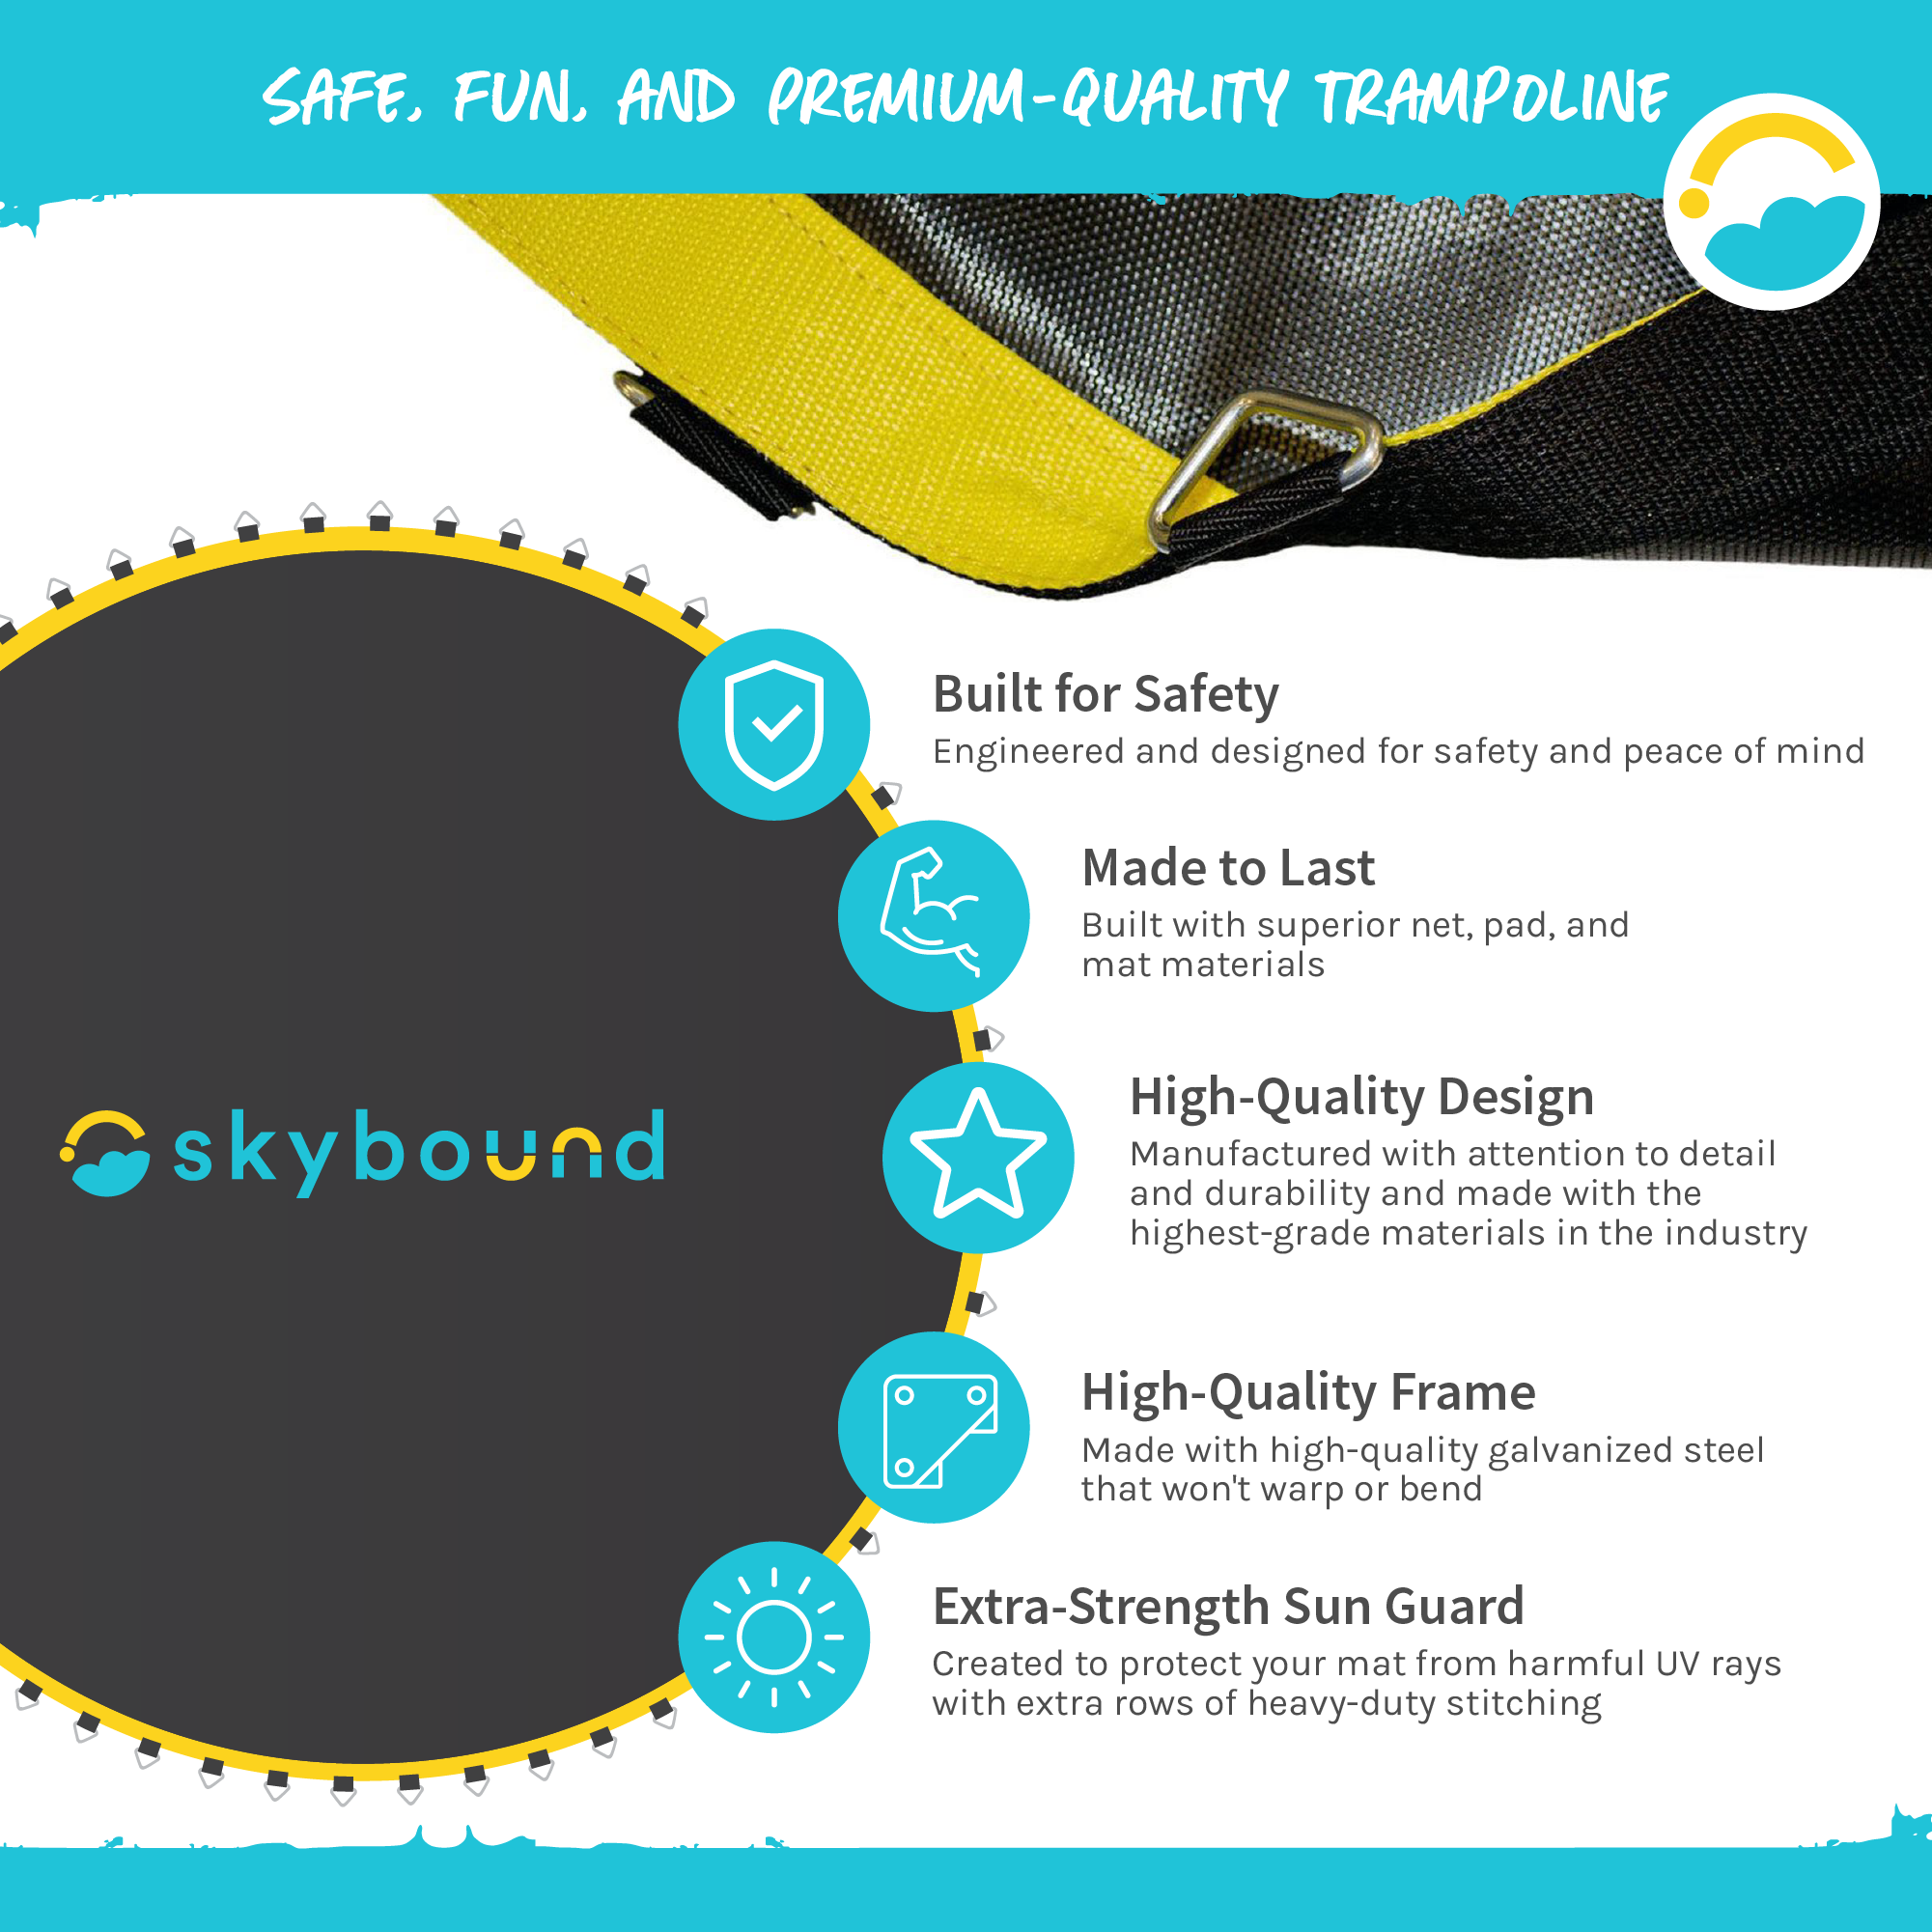 Safe, Fun, and Premium-Quality Trampoline.  1-Built for Safety.  2-Made to Last.  3-High-Quality Design.  4-High-Quality Frame.  5-Extra-Strength Sun Guard